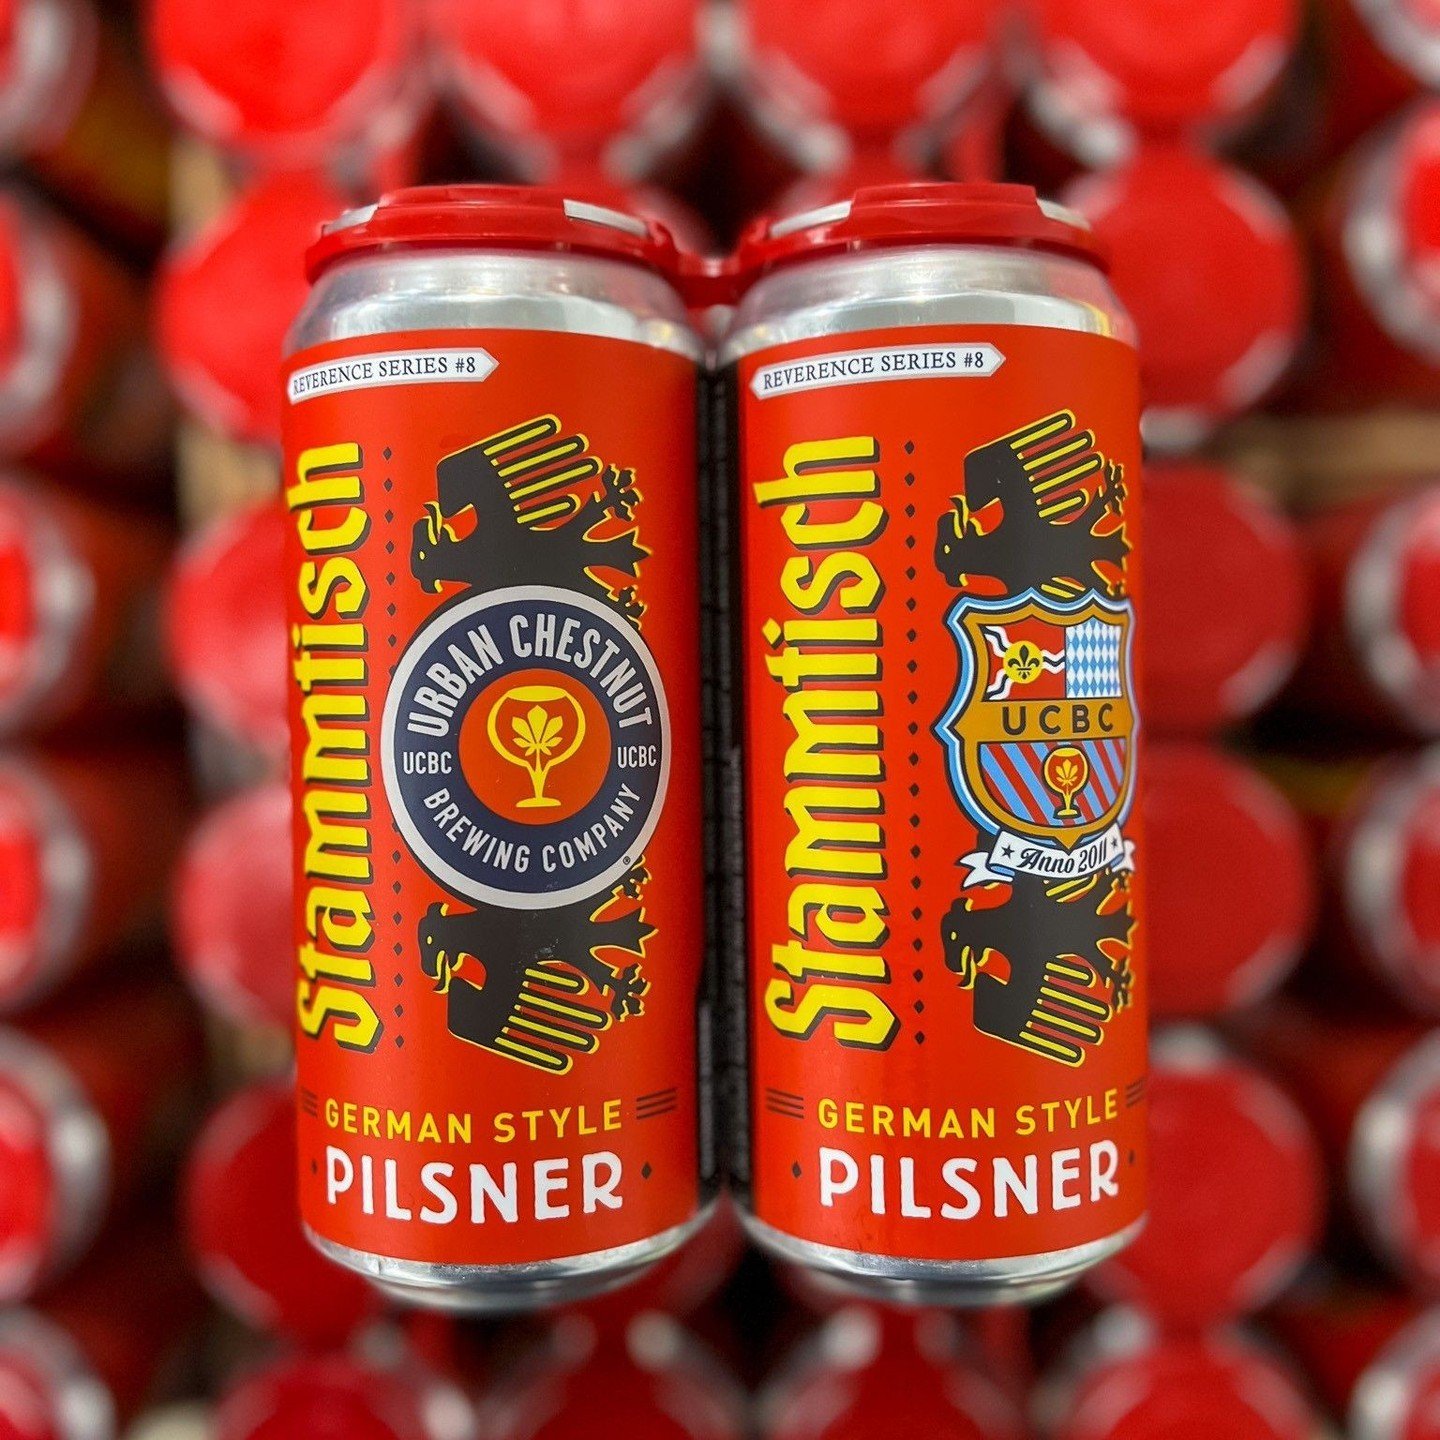 Shep's Beer of the Year &amp; friends have arrived back in our warehouse just in time for Spring. ⁠
⁠
Urban Chestnut Brewing Company is an unconventional-minded yet tradition-oriented brewer of craft beer with authentic heritage and proven quality.⁠
